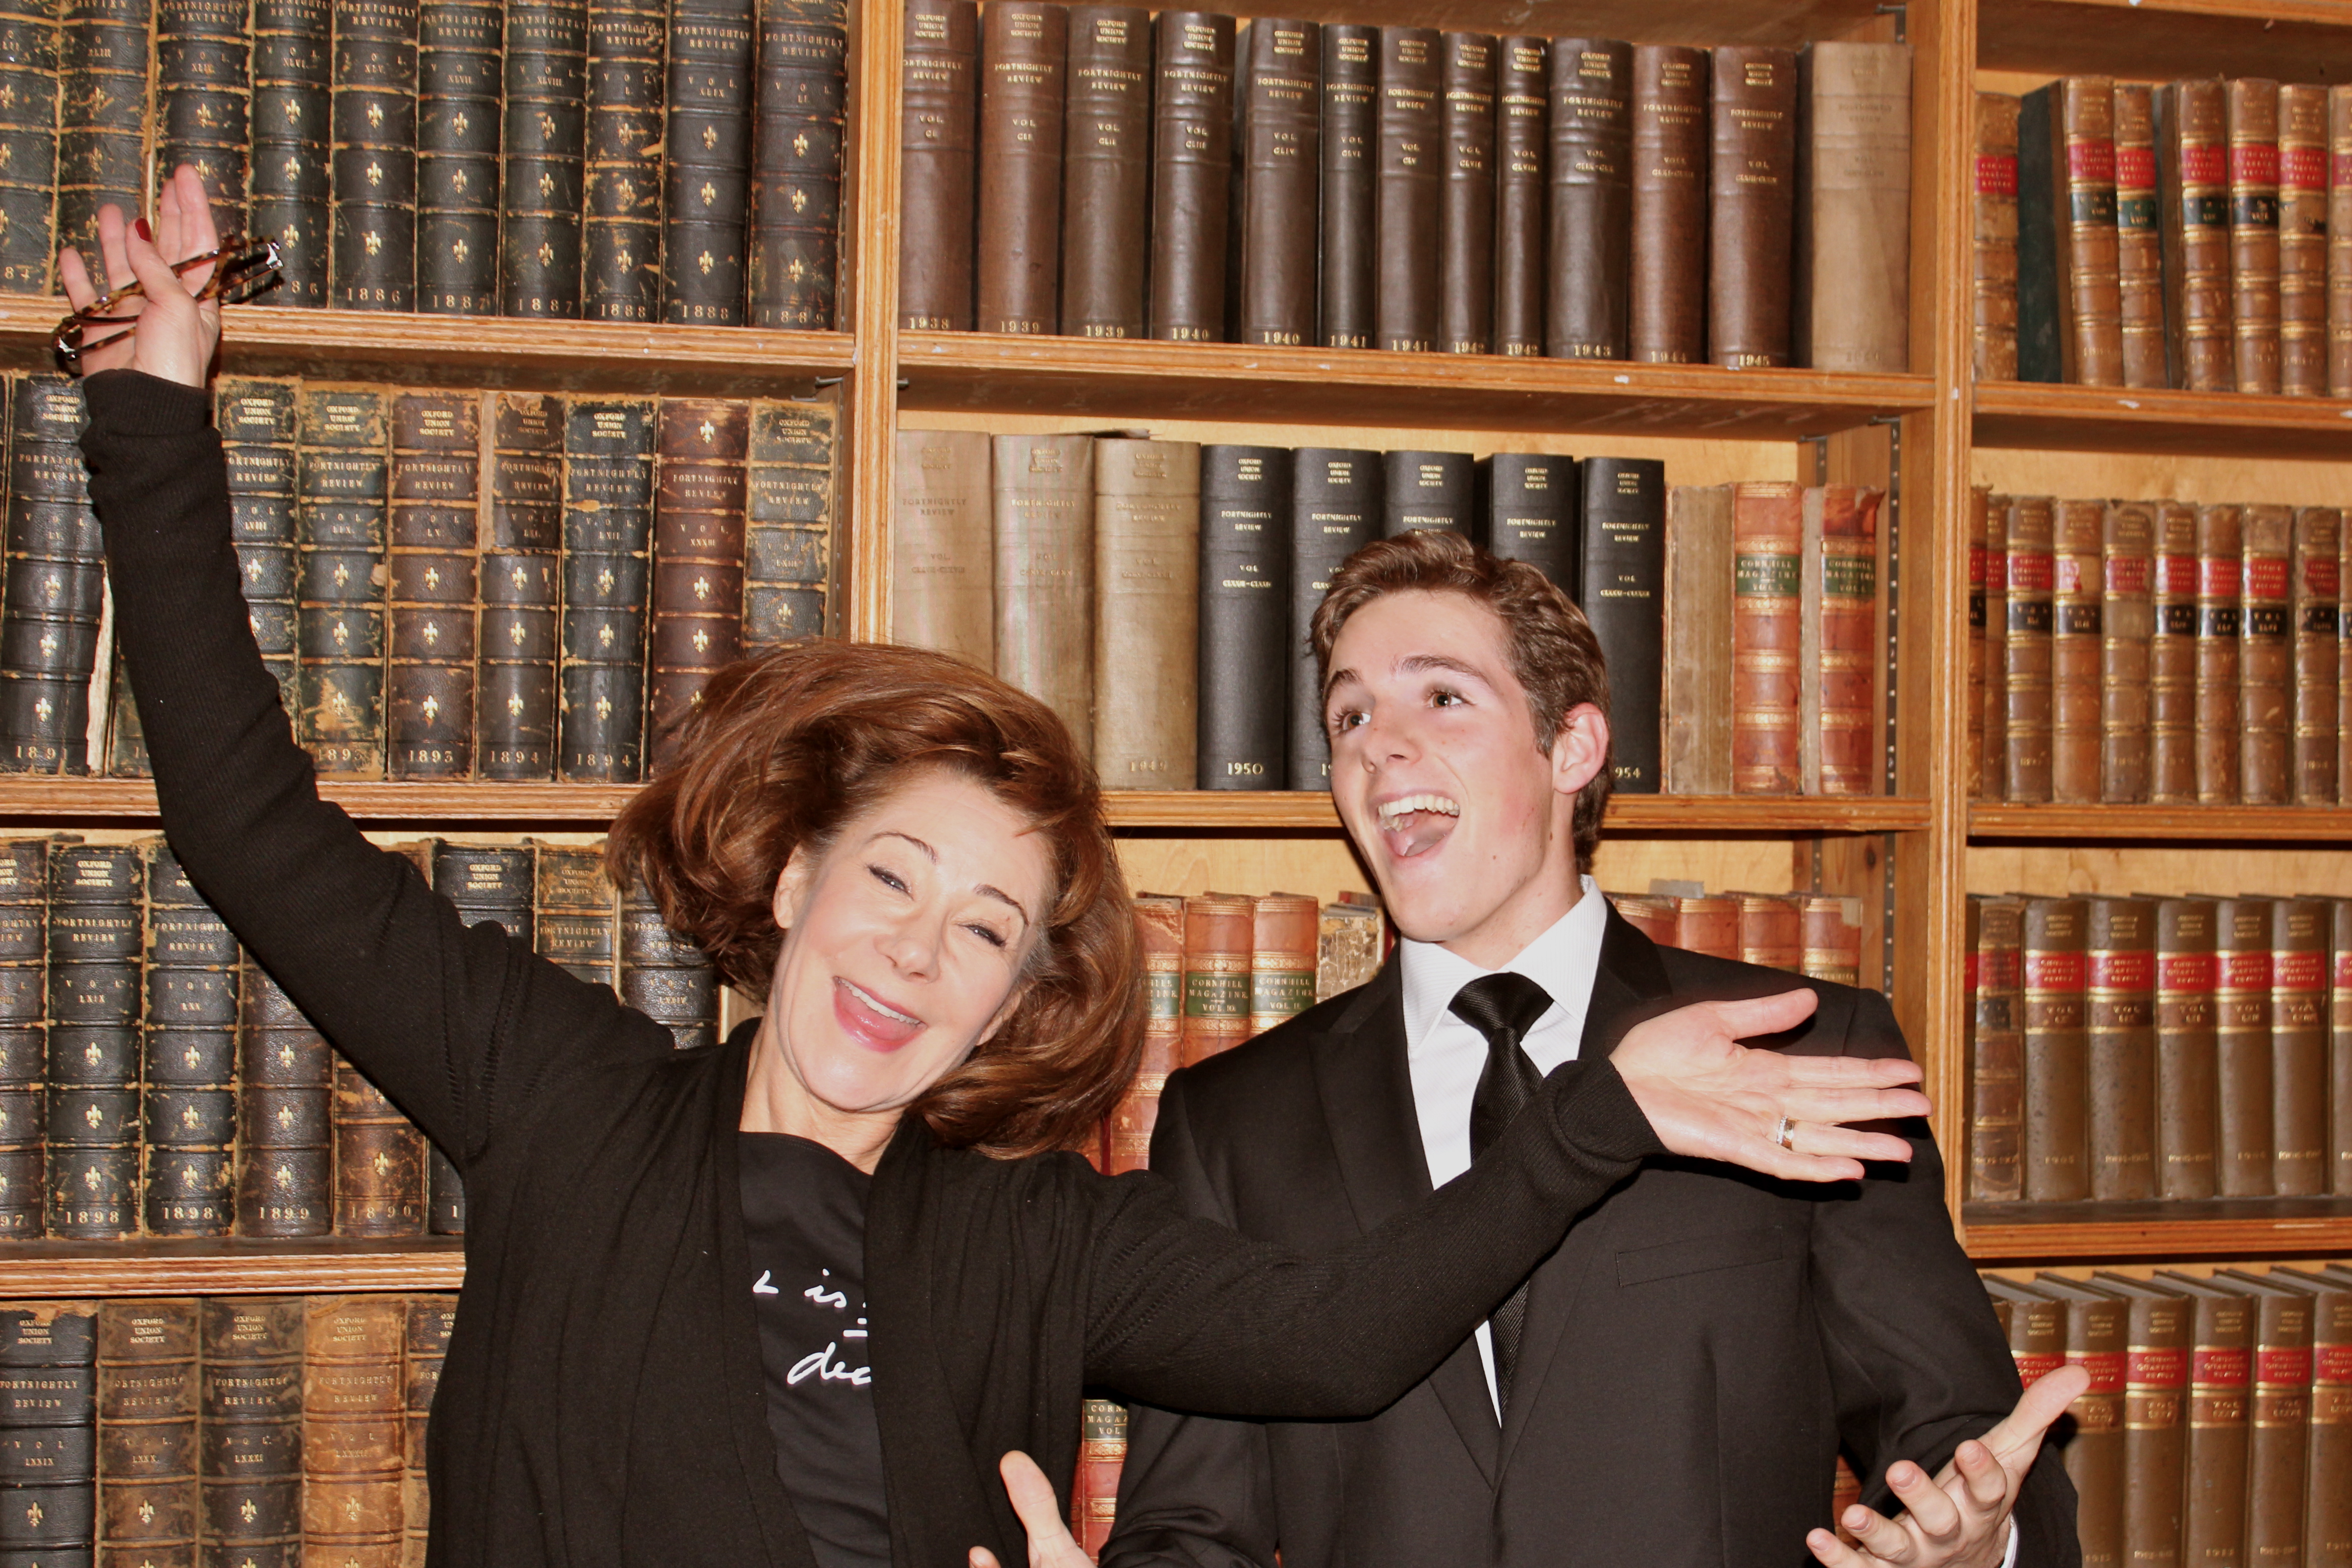 Discussing the Stanislavski method with Zoe Wanamaker and Ethan Averton